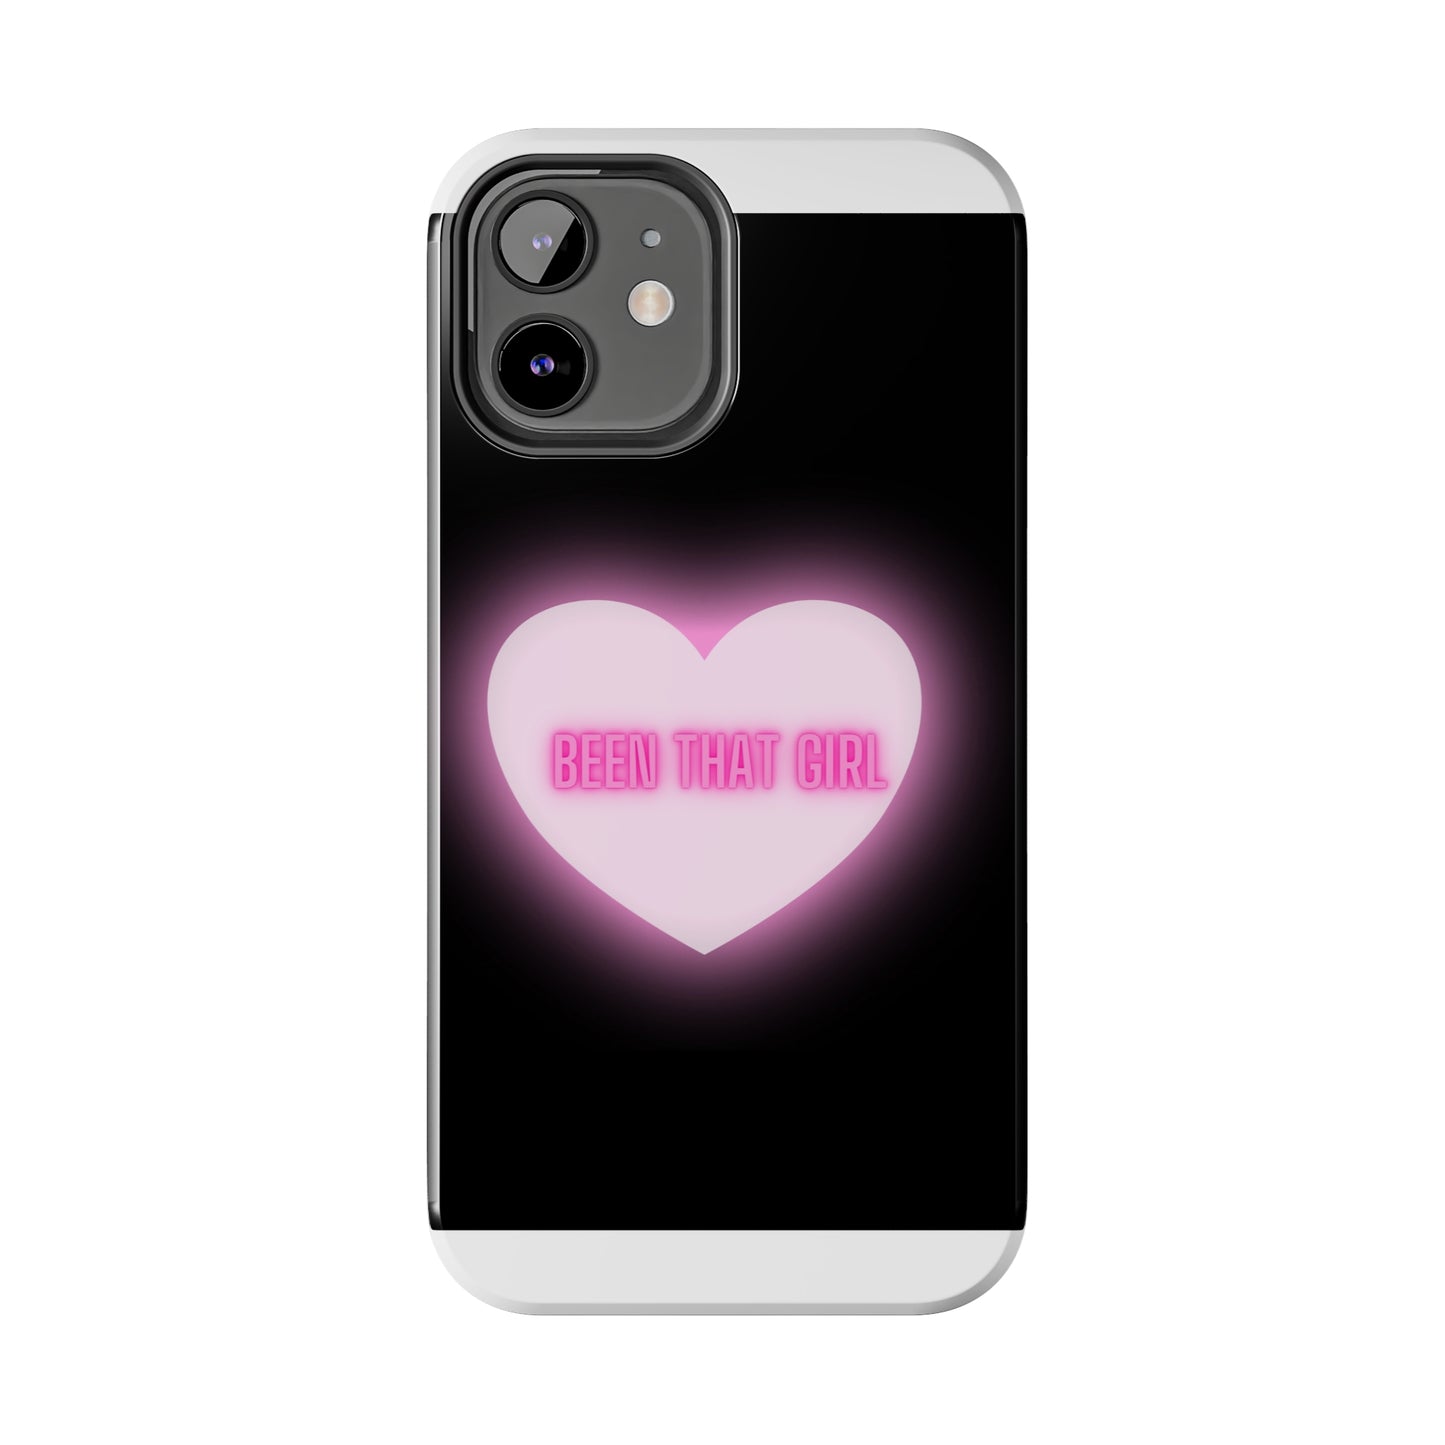 Been that girl iPhone case